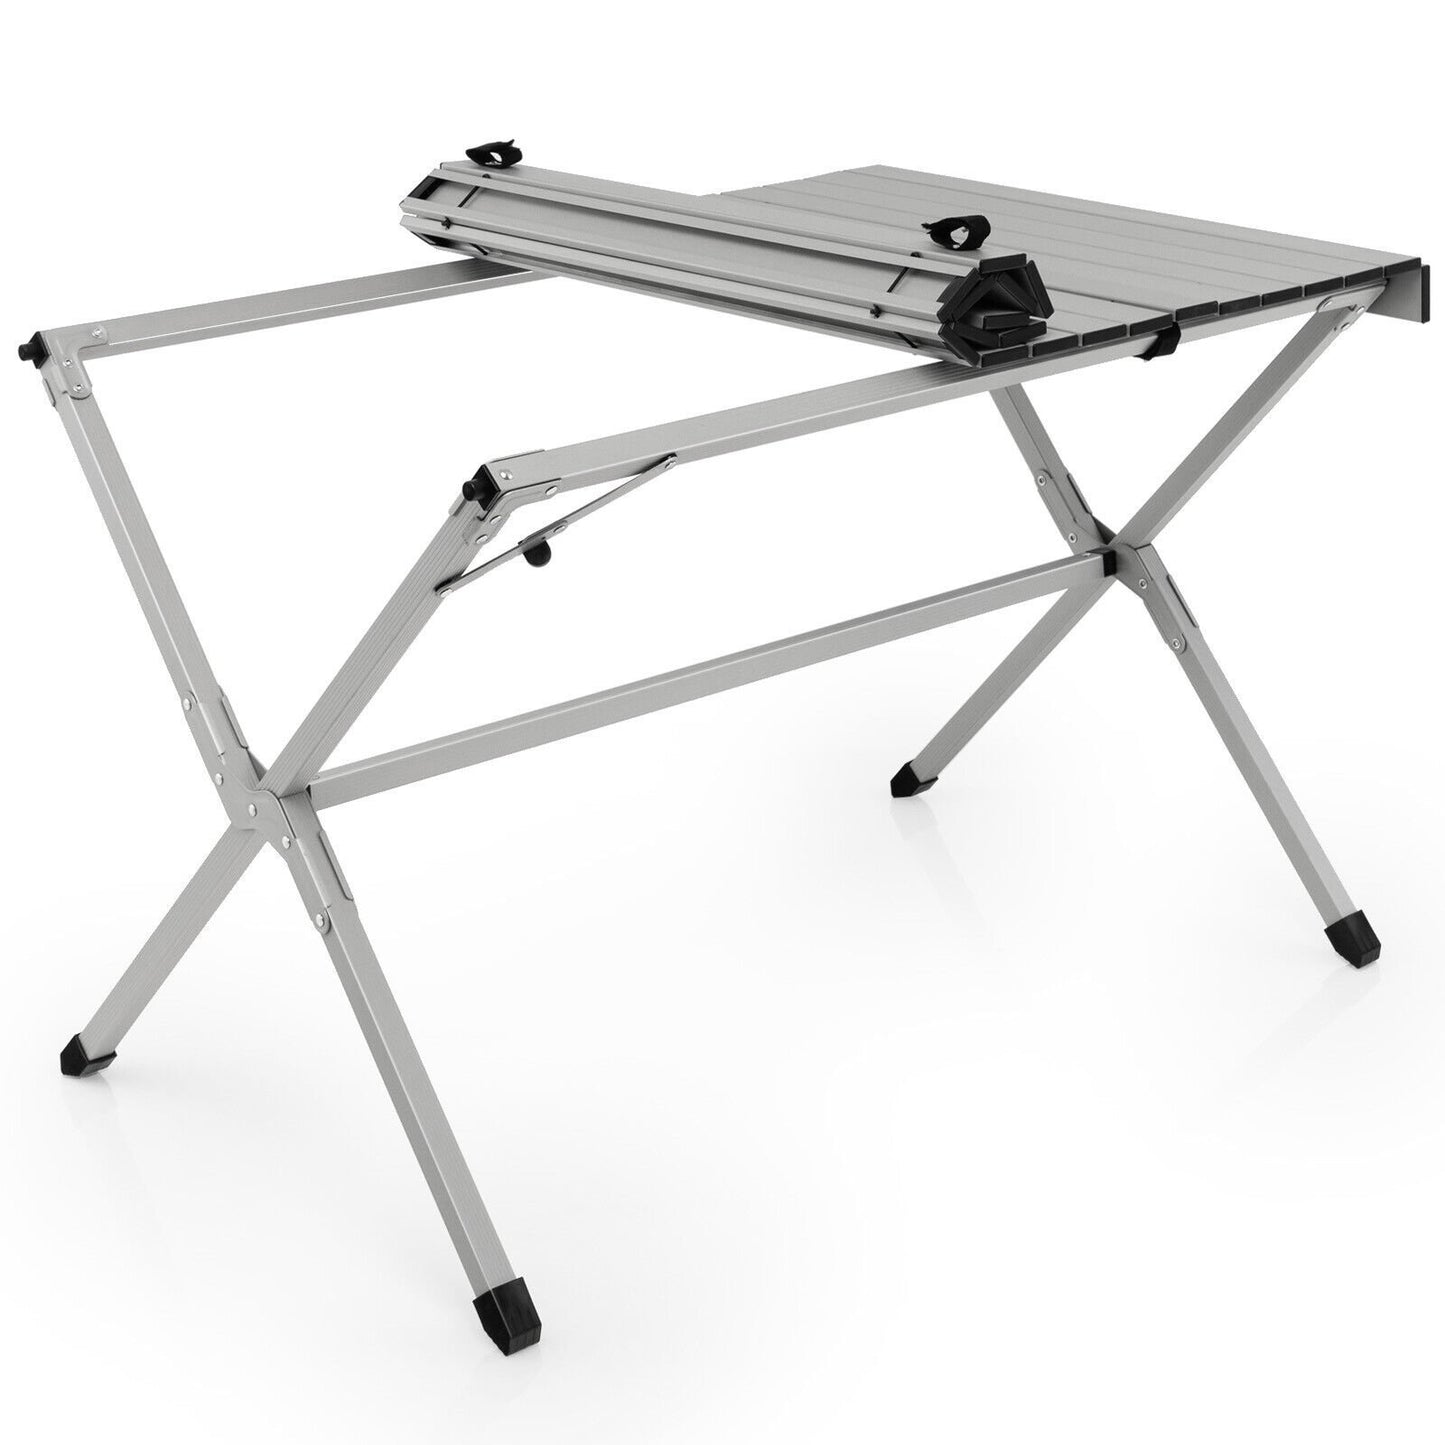 4-6 Person Portable Aluminum Camping Table with Carrying Bag, Gray